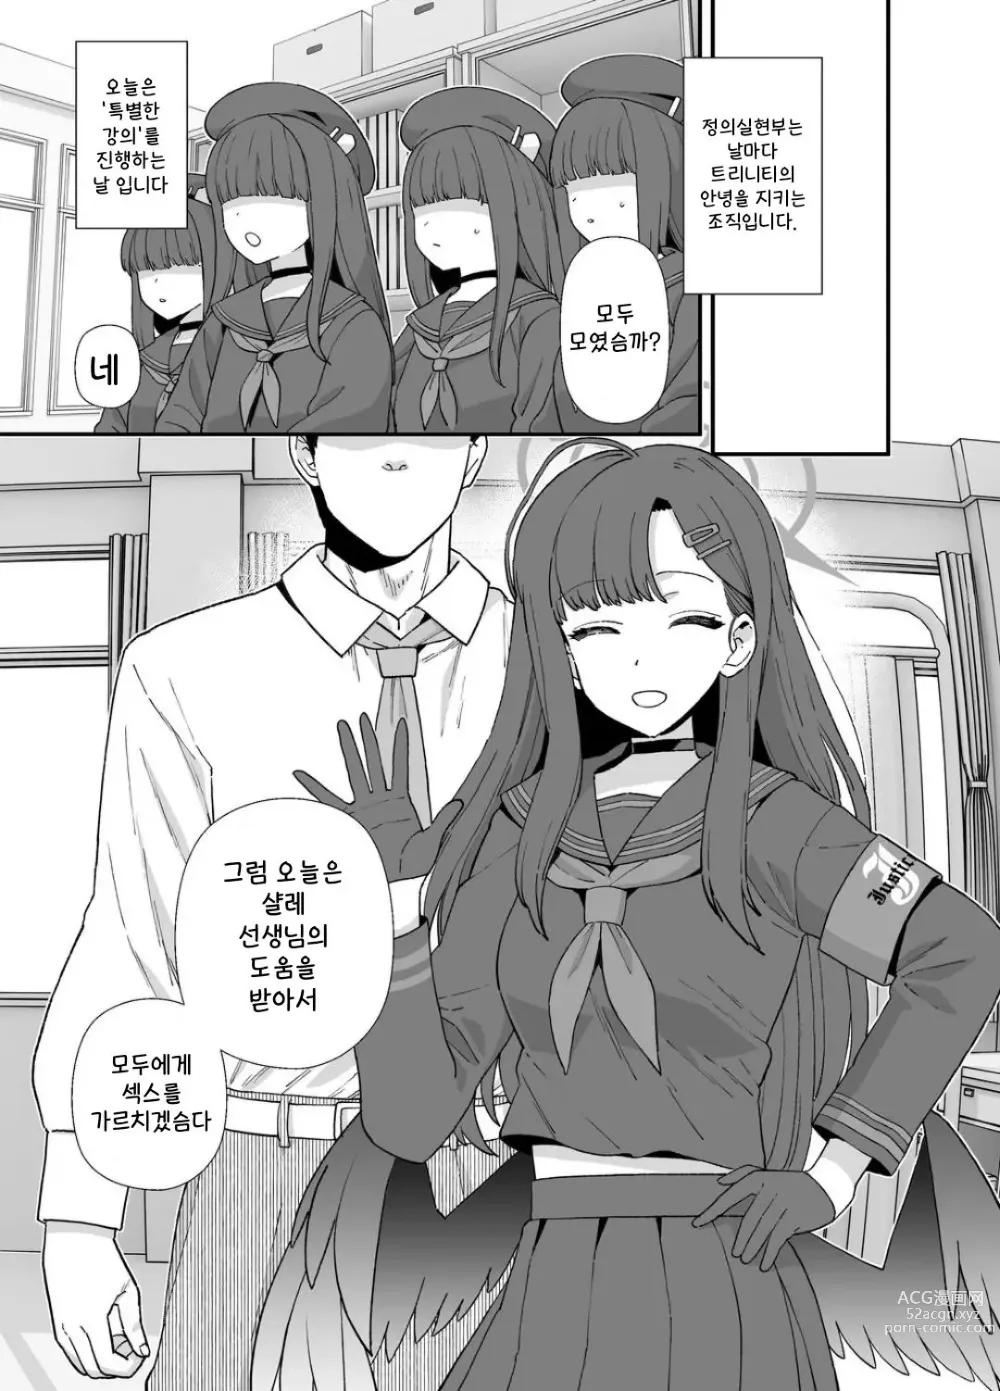 Page 1 of doujinshi 블루아카 이치카 섹스 만화